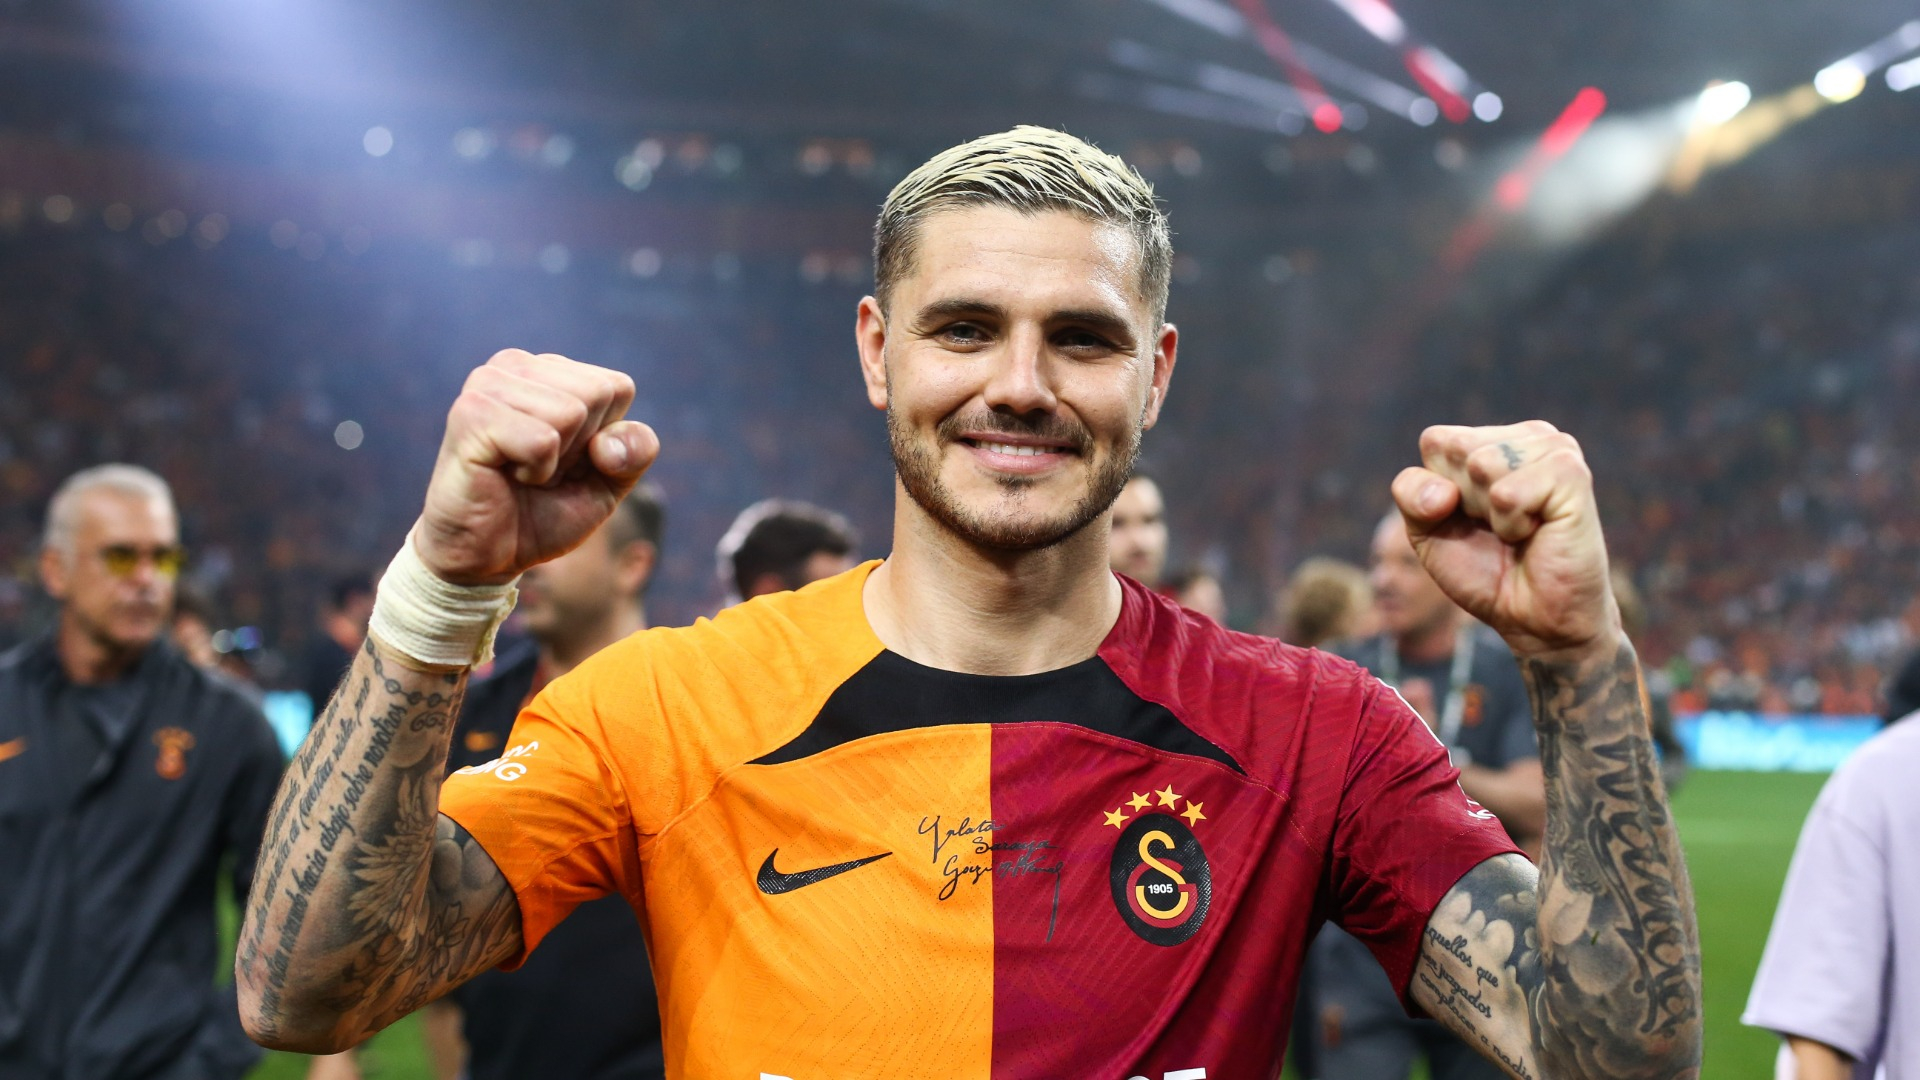 Fabrizio Romano - 🟡🔴  𝐇𝐄𝐑𝐄 𝐖𝐄 𝐆𝐎: Mauro Icardi Galatasaray have  signed contracts with PSG as Mauro Icardi will be their new stiker,  confirmed and here we go! 🇦🇷🇹🇷🤝 ▫️ Icardi